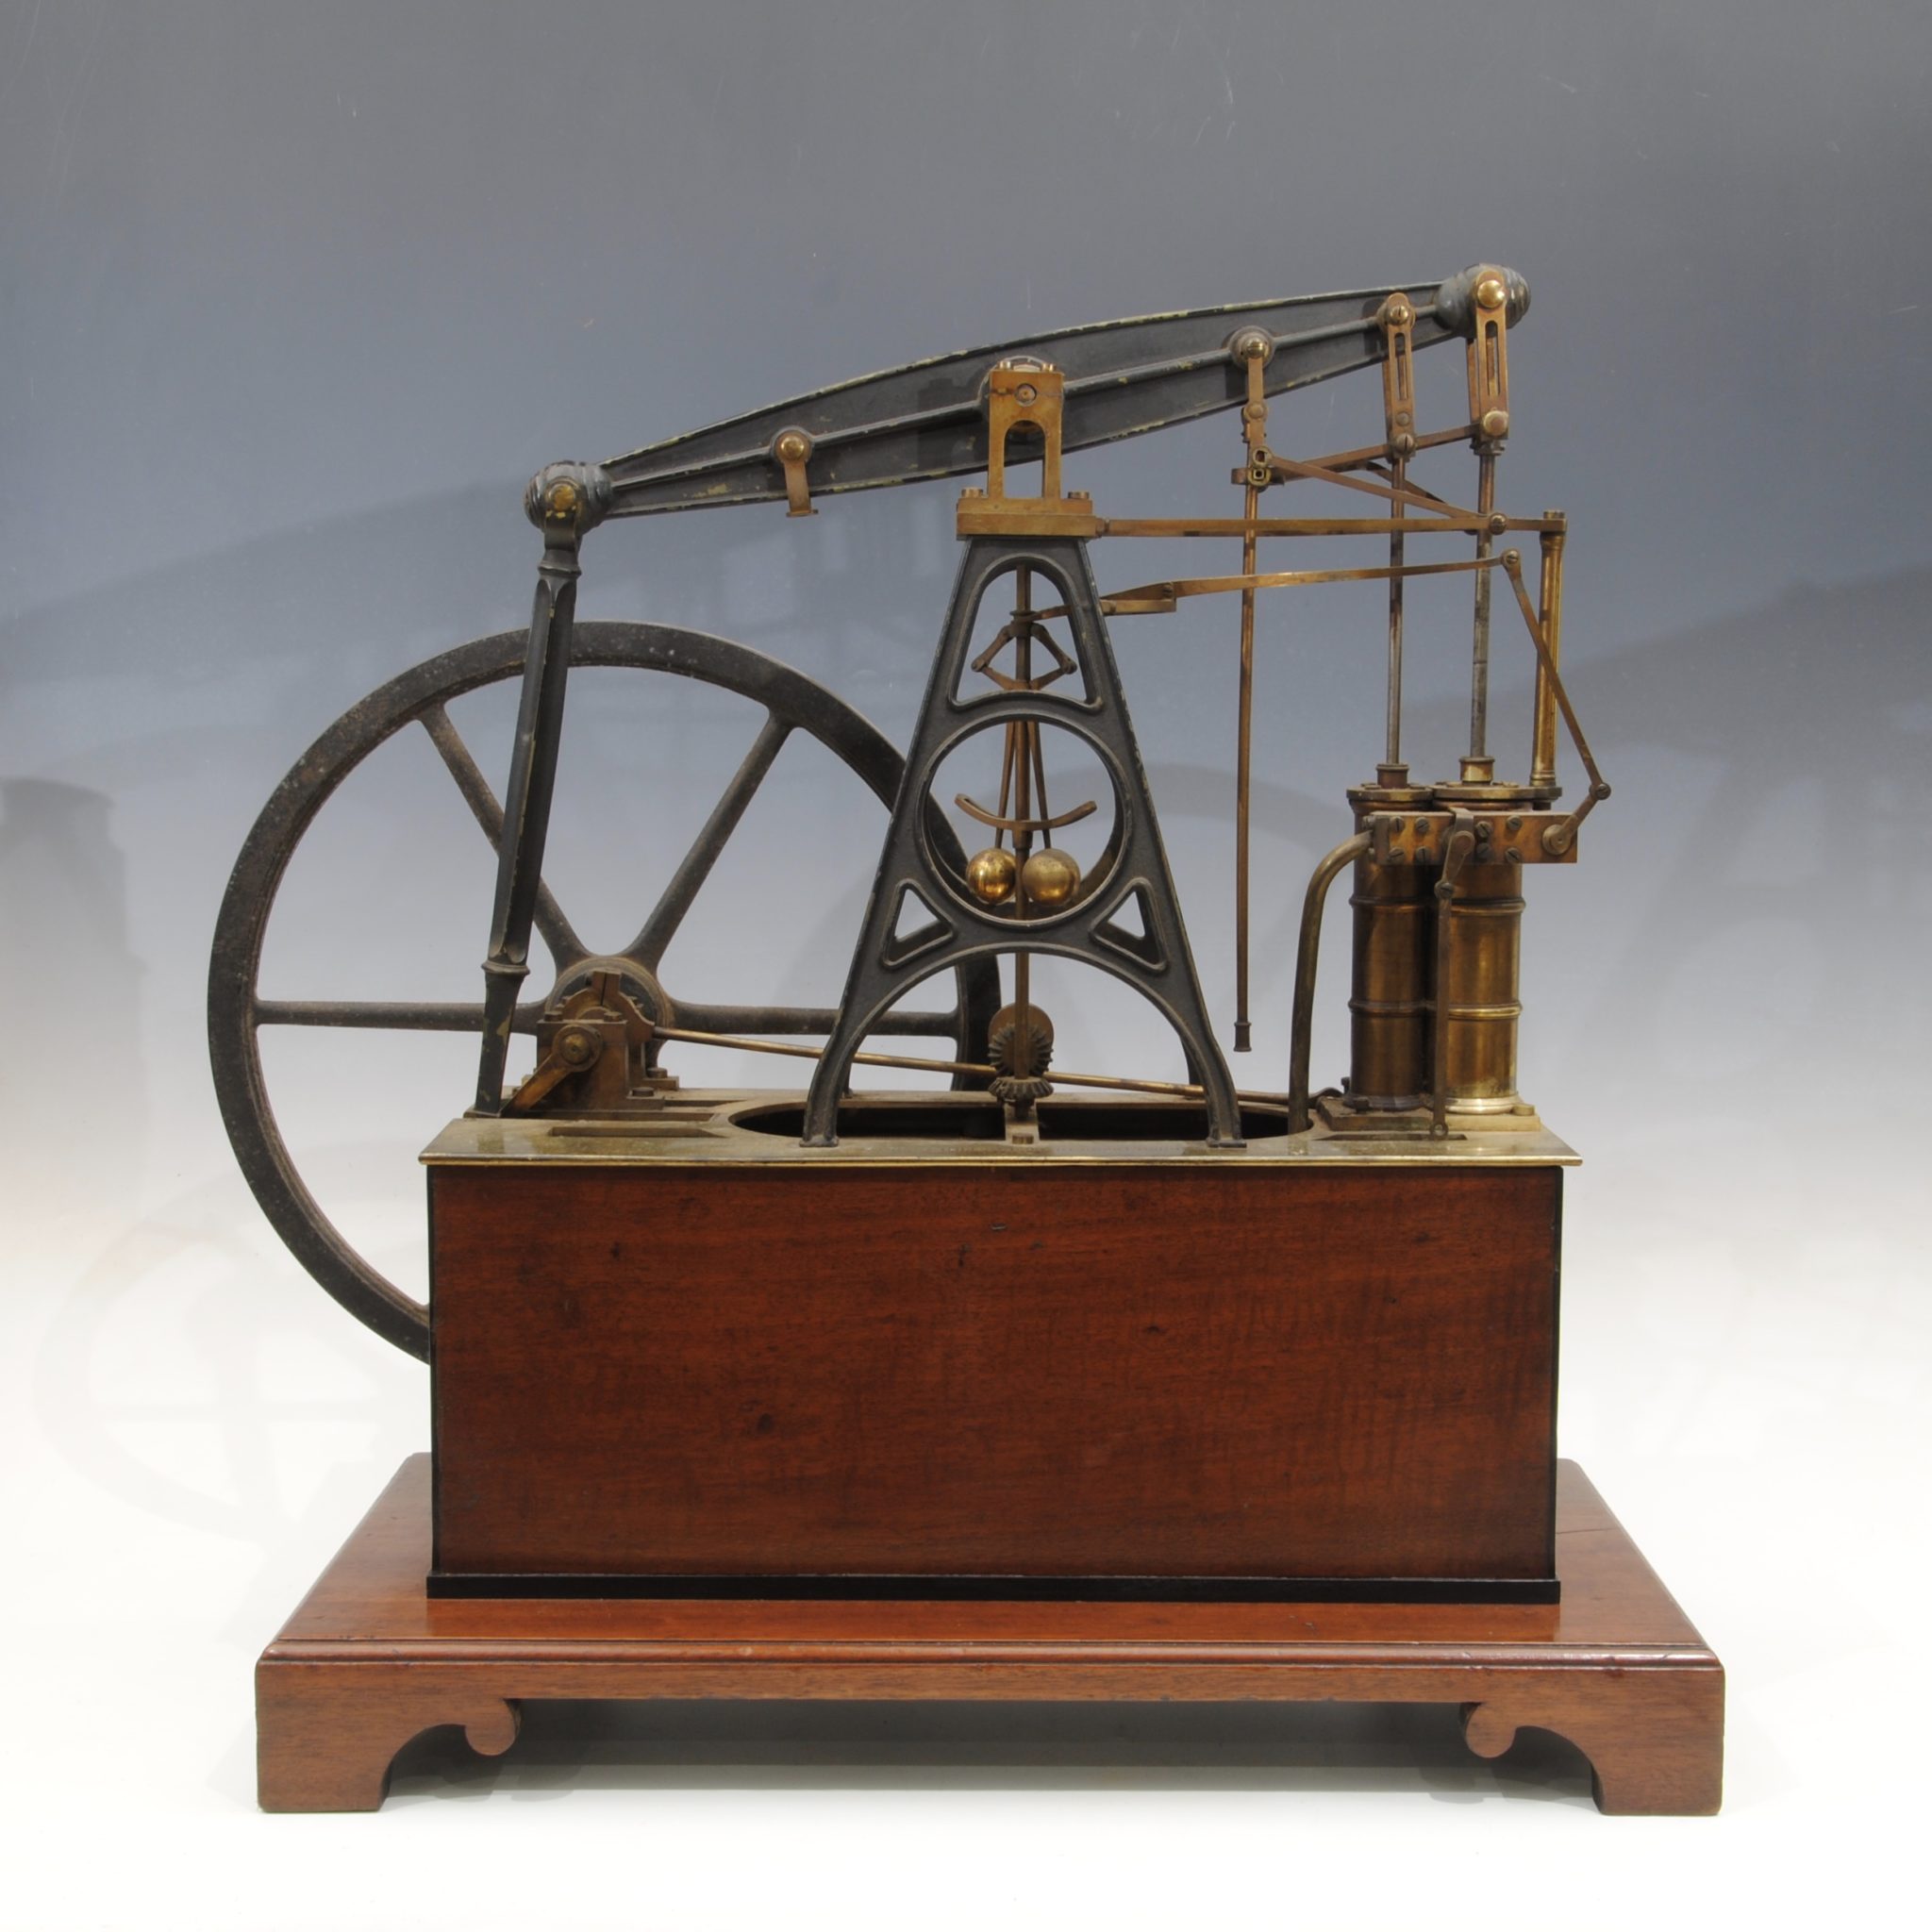 A rare Watkins and Hill model beam engine